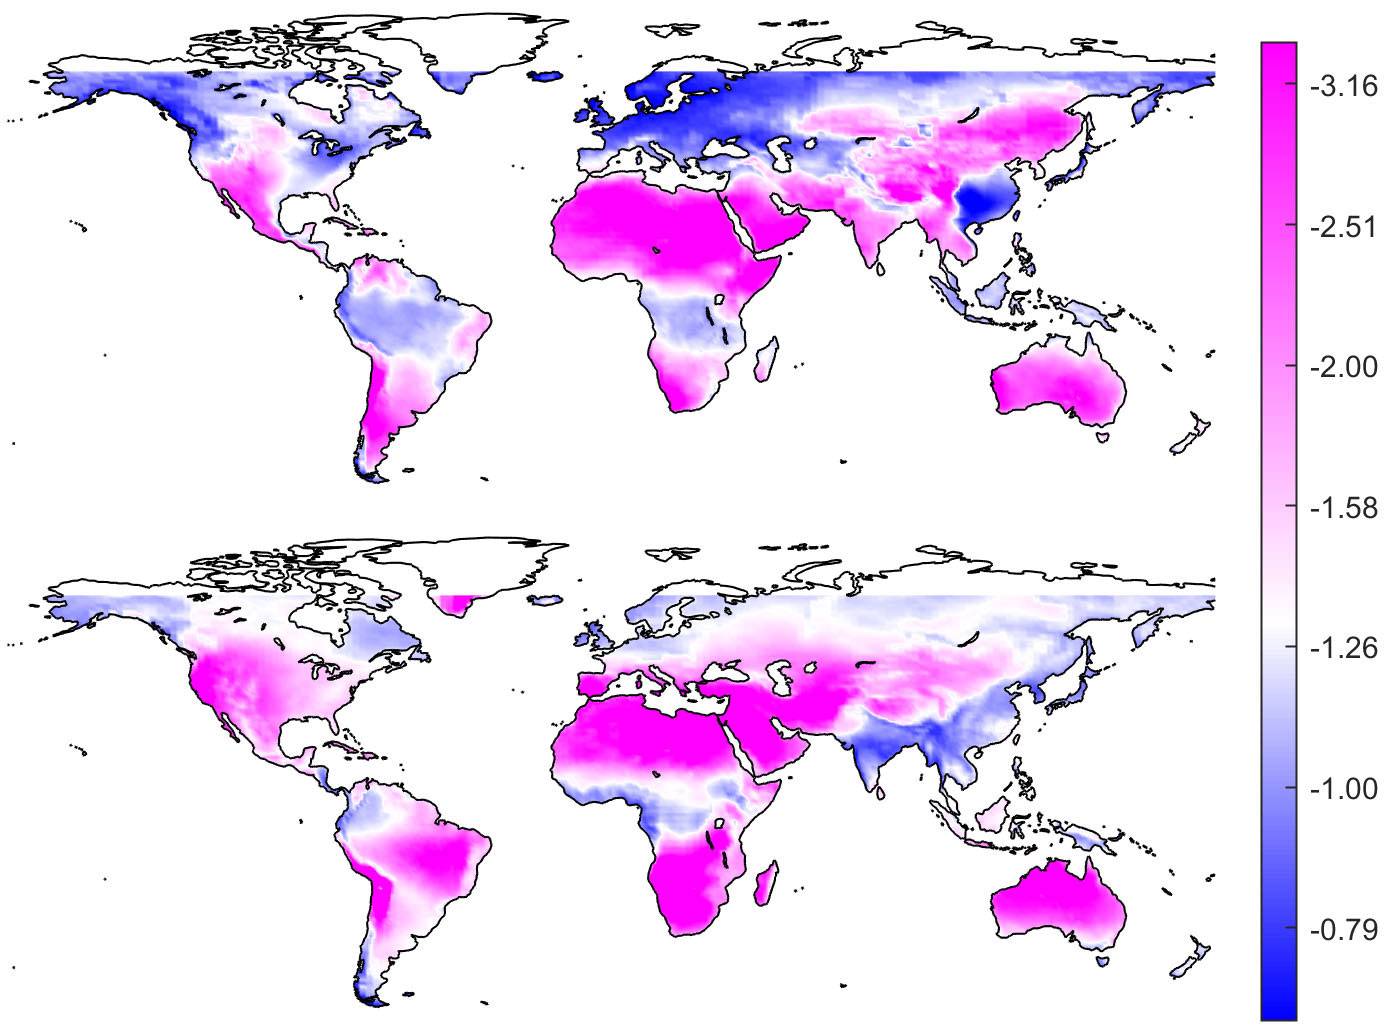 Tow world maps showing fluctuations in sunshine